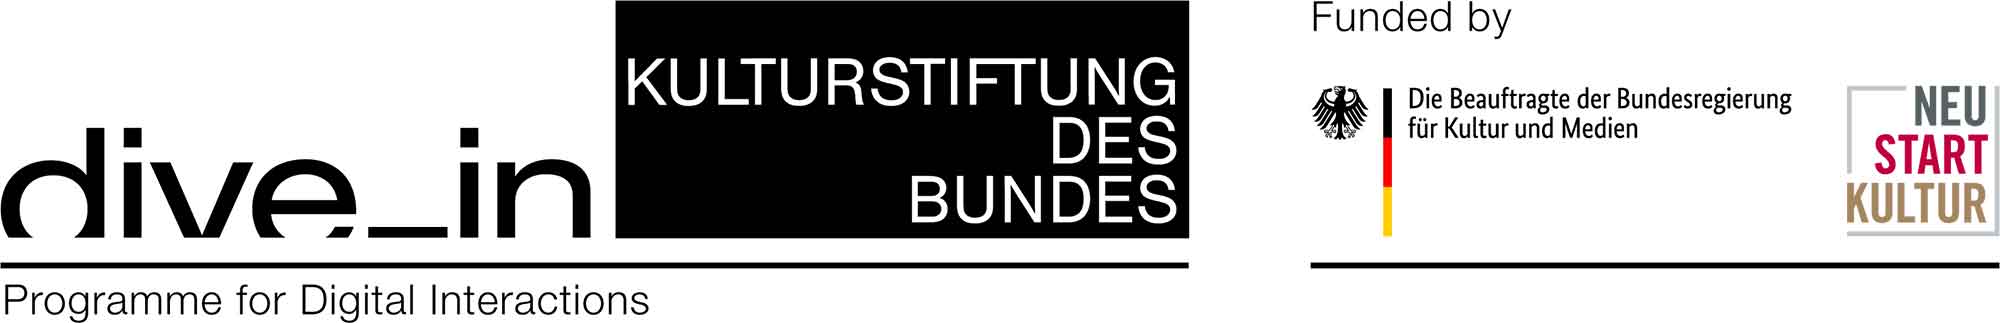 Muski was developed as part of "dive in. Programme for Digital Interactions" of the Kulturstiftung des Bundes (German Federal Cultural Foundation) with funding by the Federal Government Commissioner for Culture and the Media (BKM) through the NEUSTART KULTUR programme.